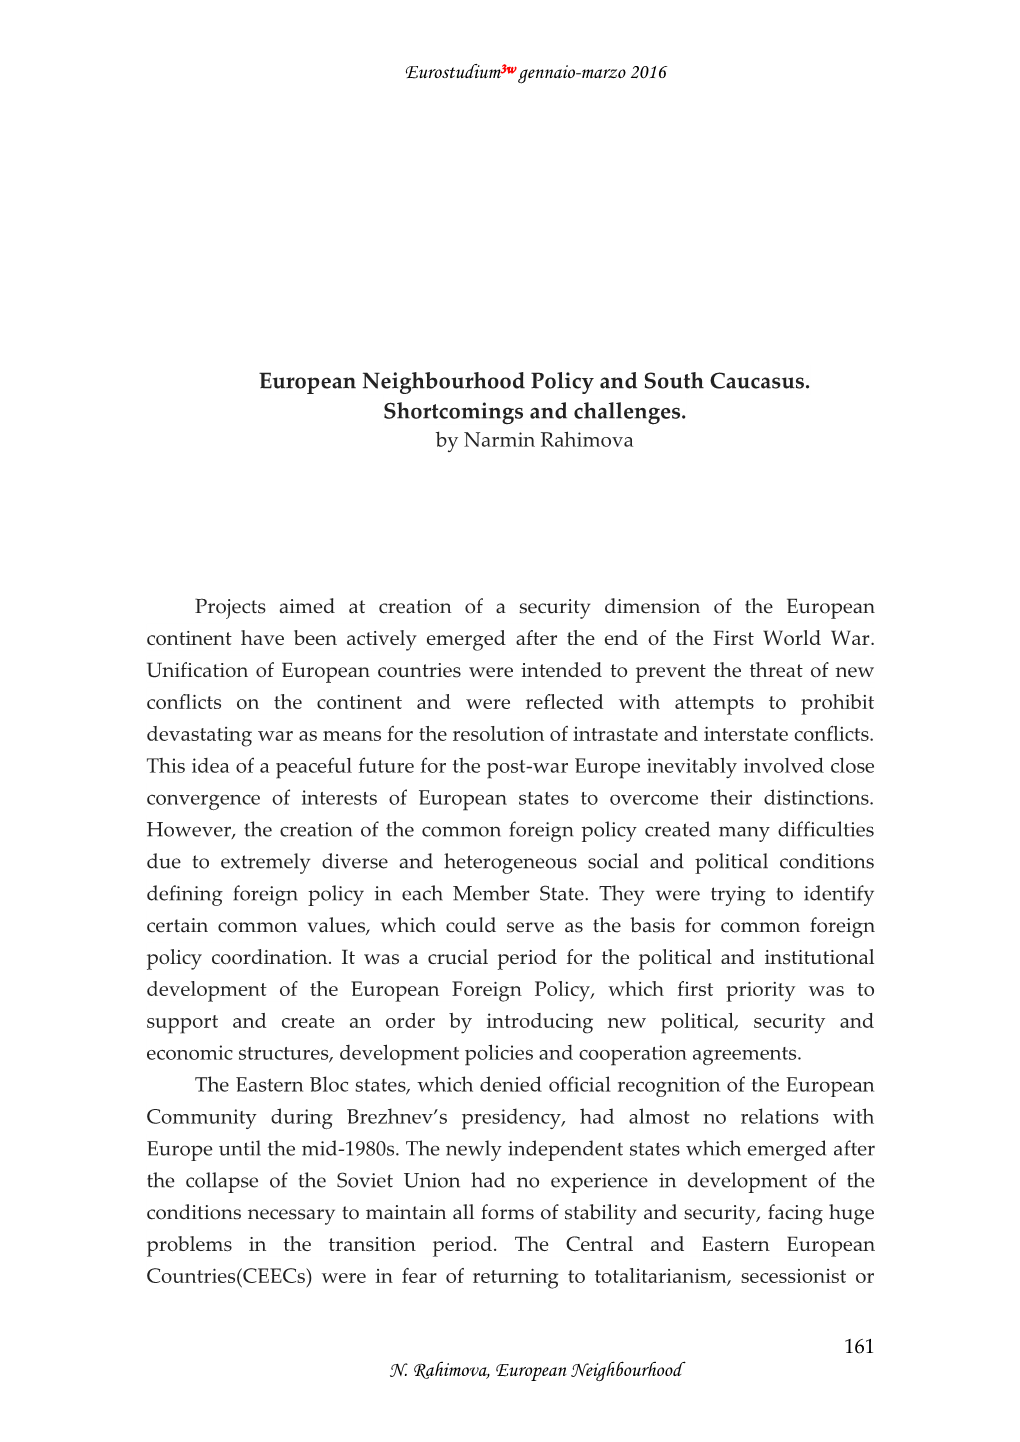 European Neighbourhood Policy and South Caucasus. Shortcomings and Challenges